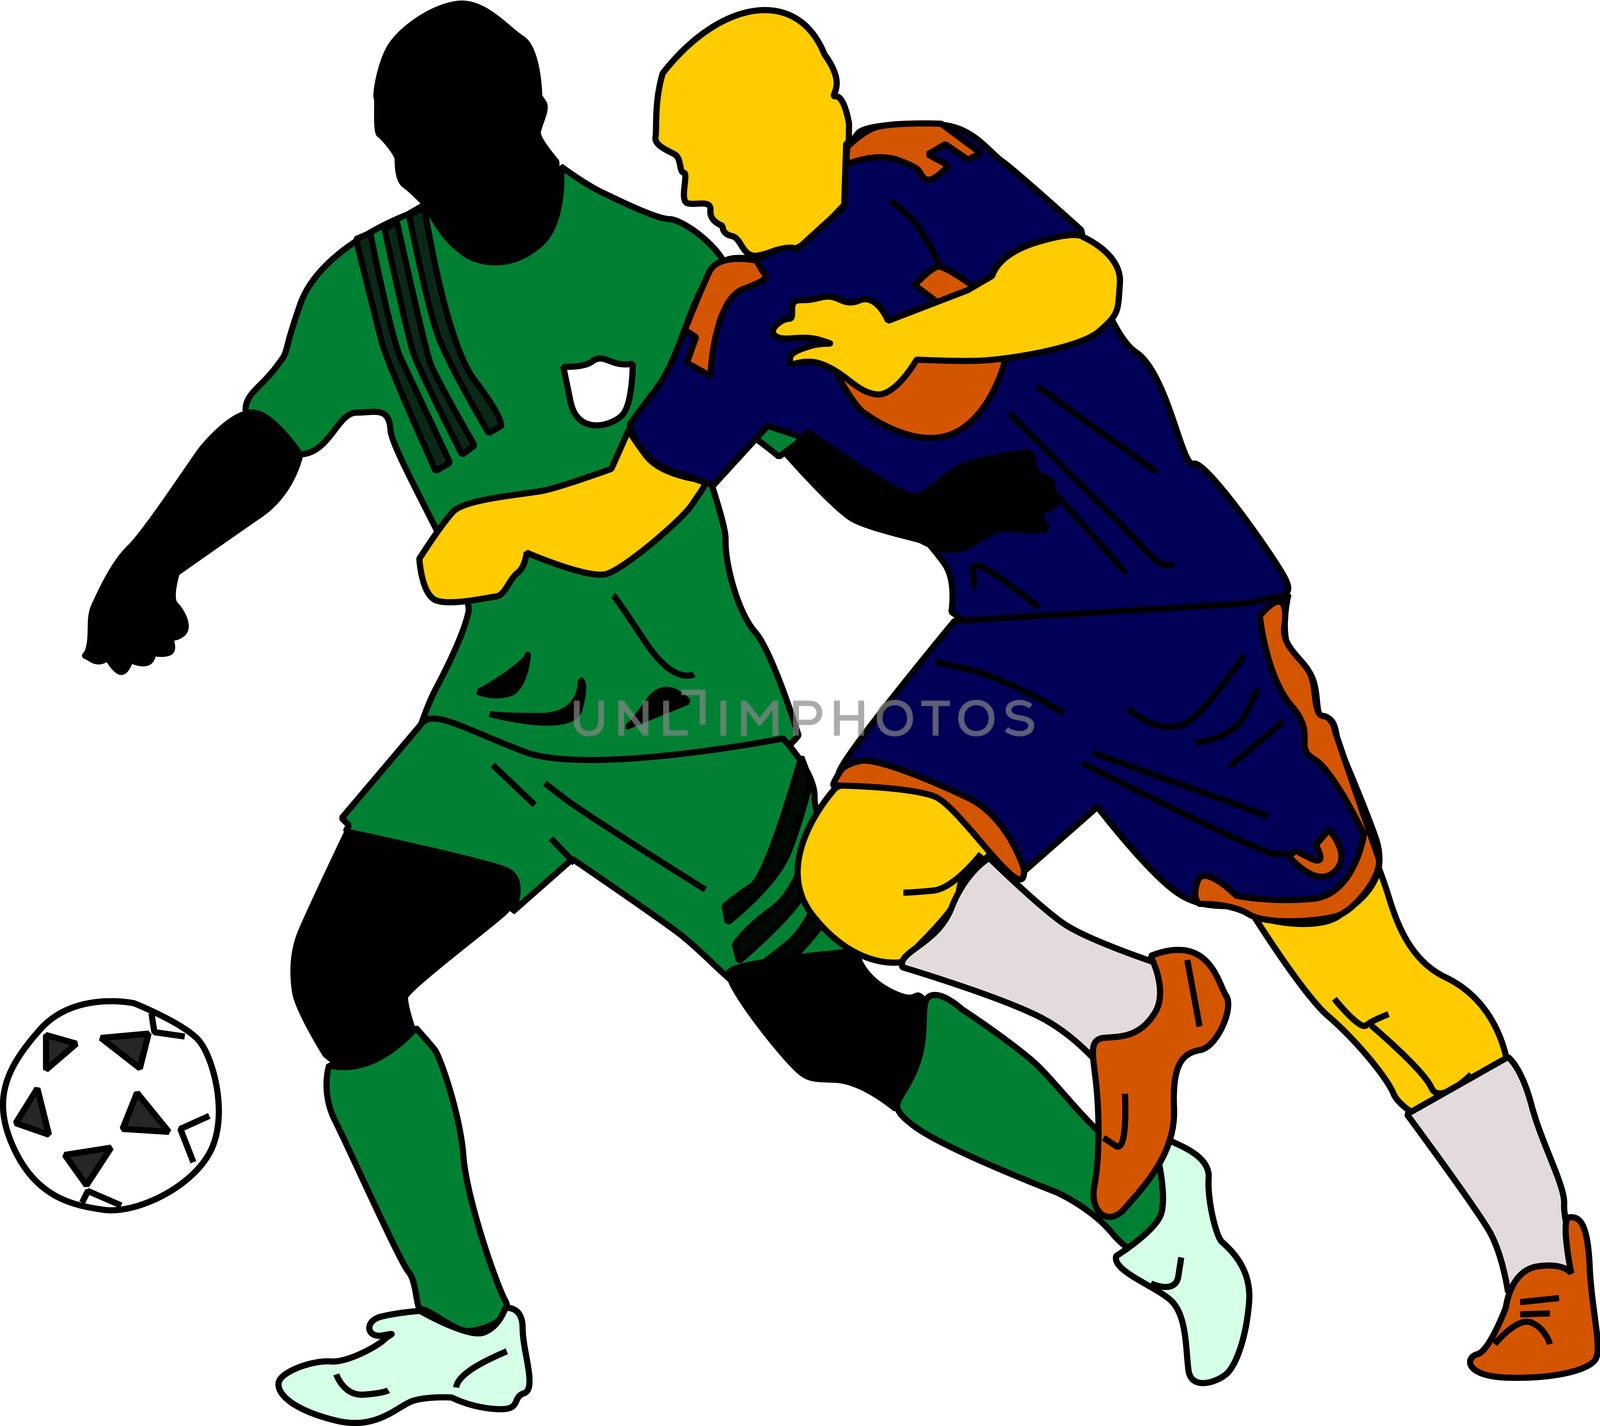 Two silhouettes of soccer players go after the ball. 